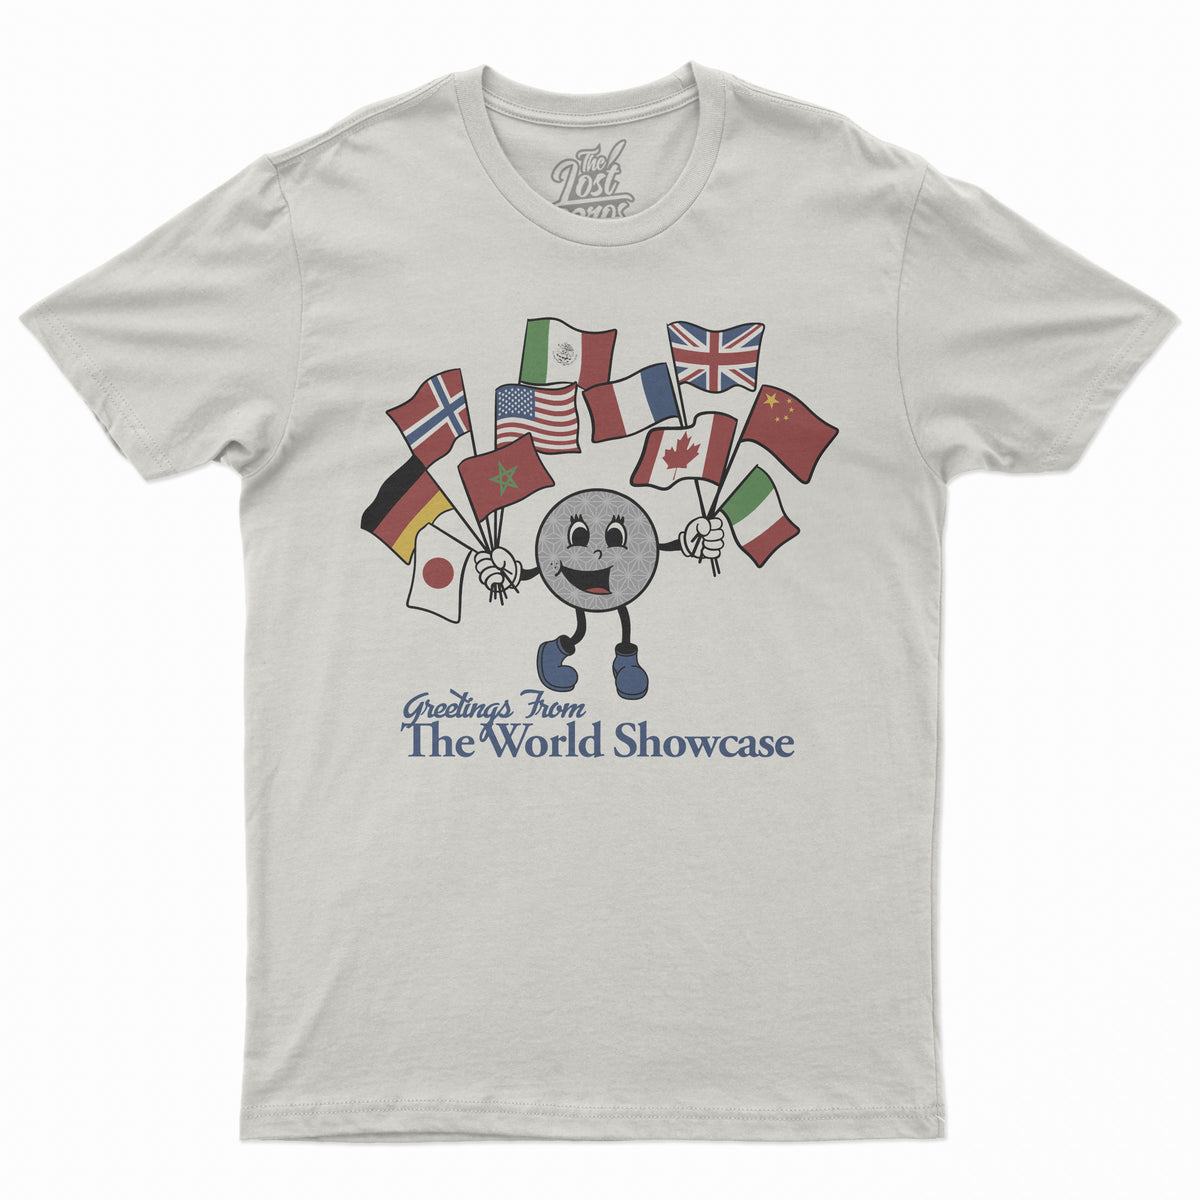 Greetings from the World Showcase Tee